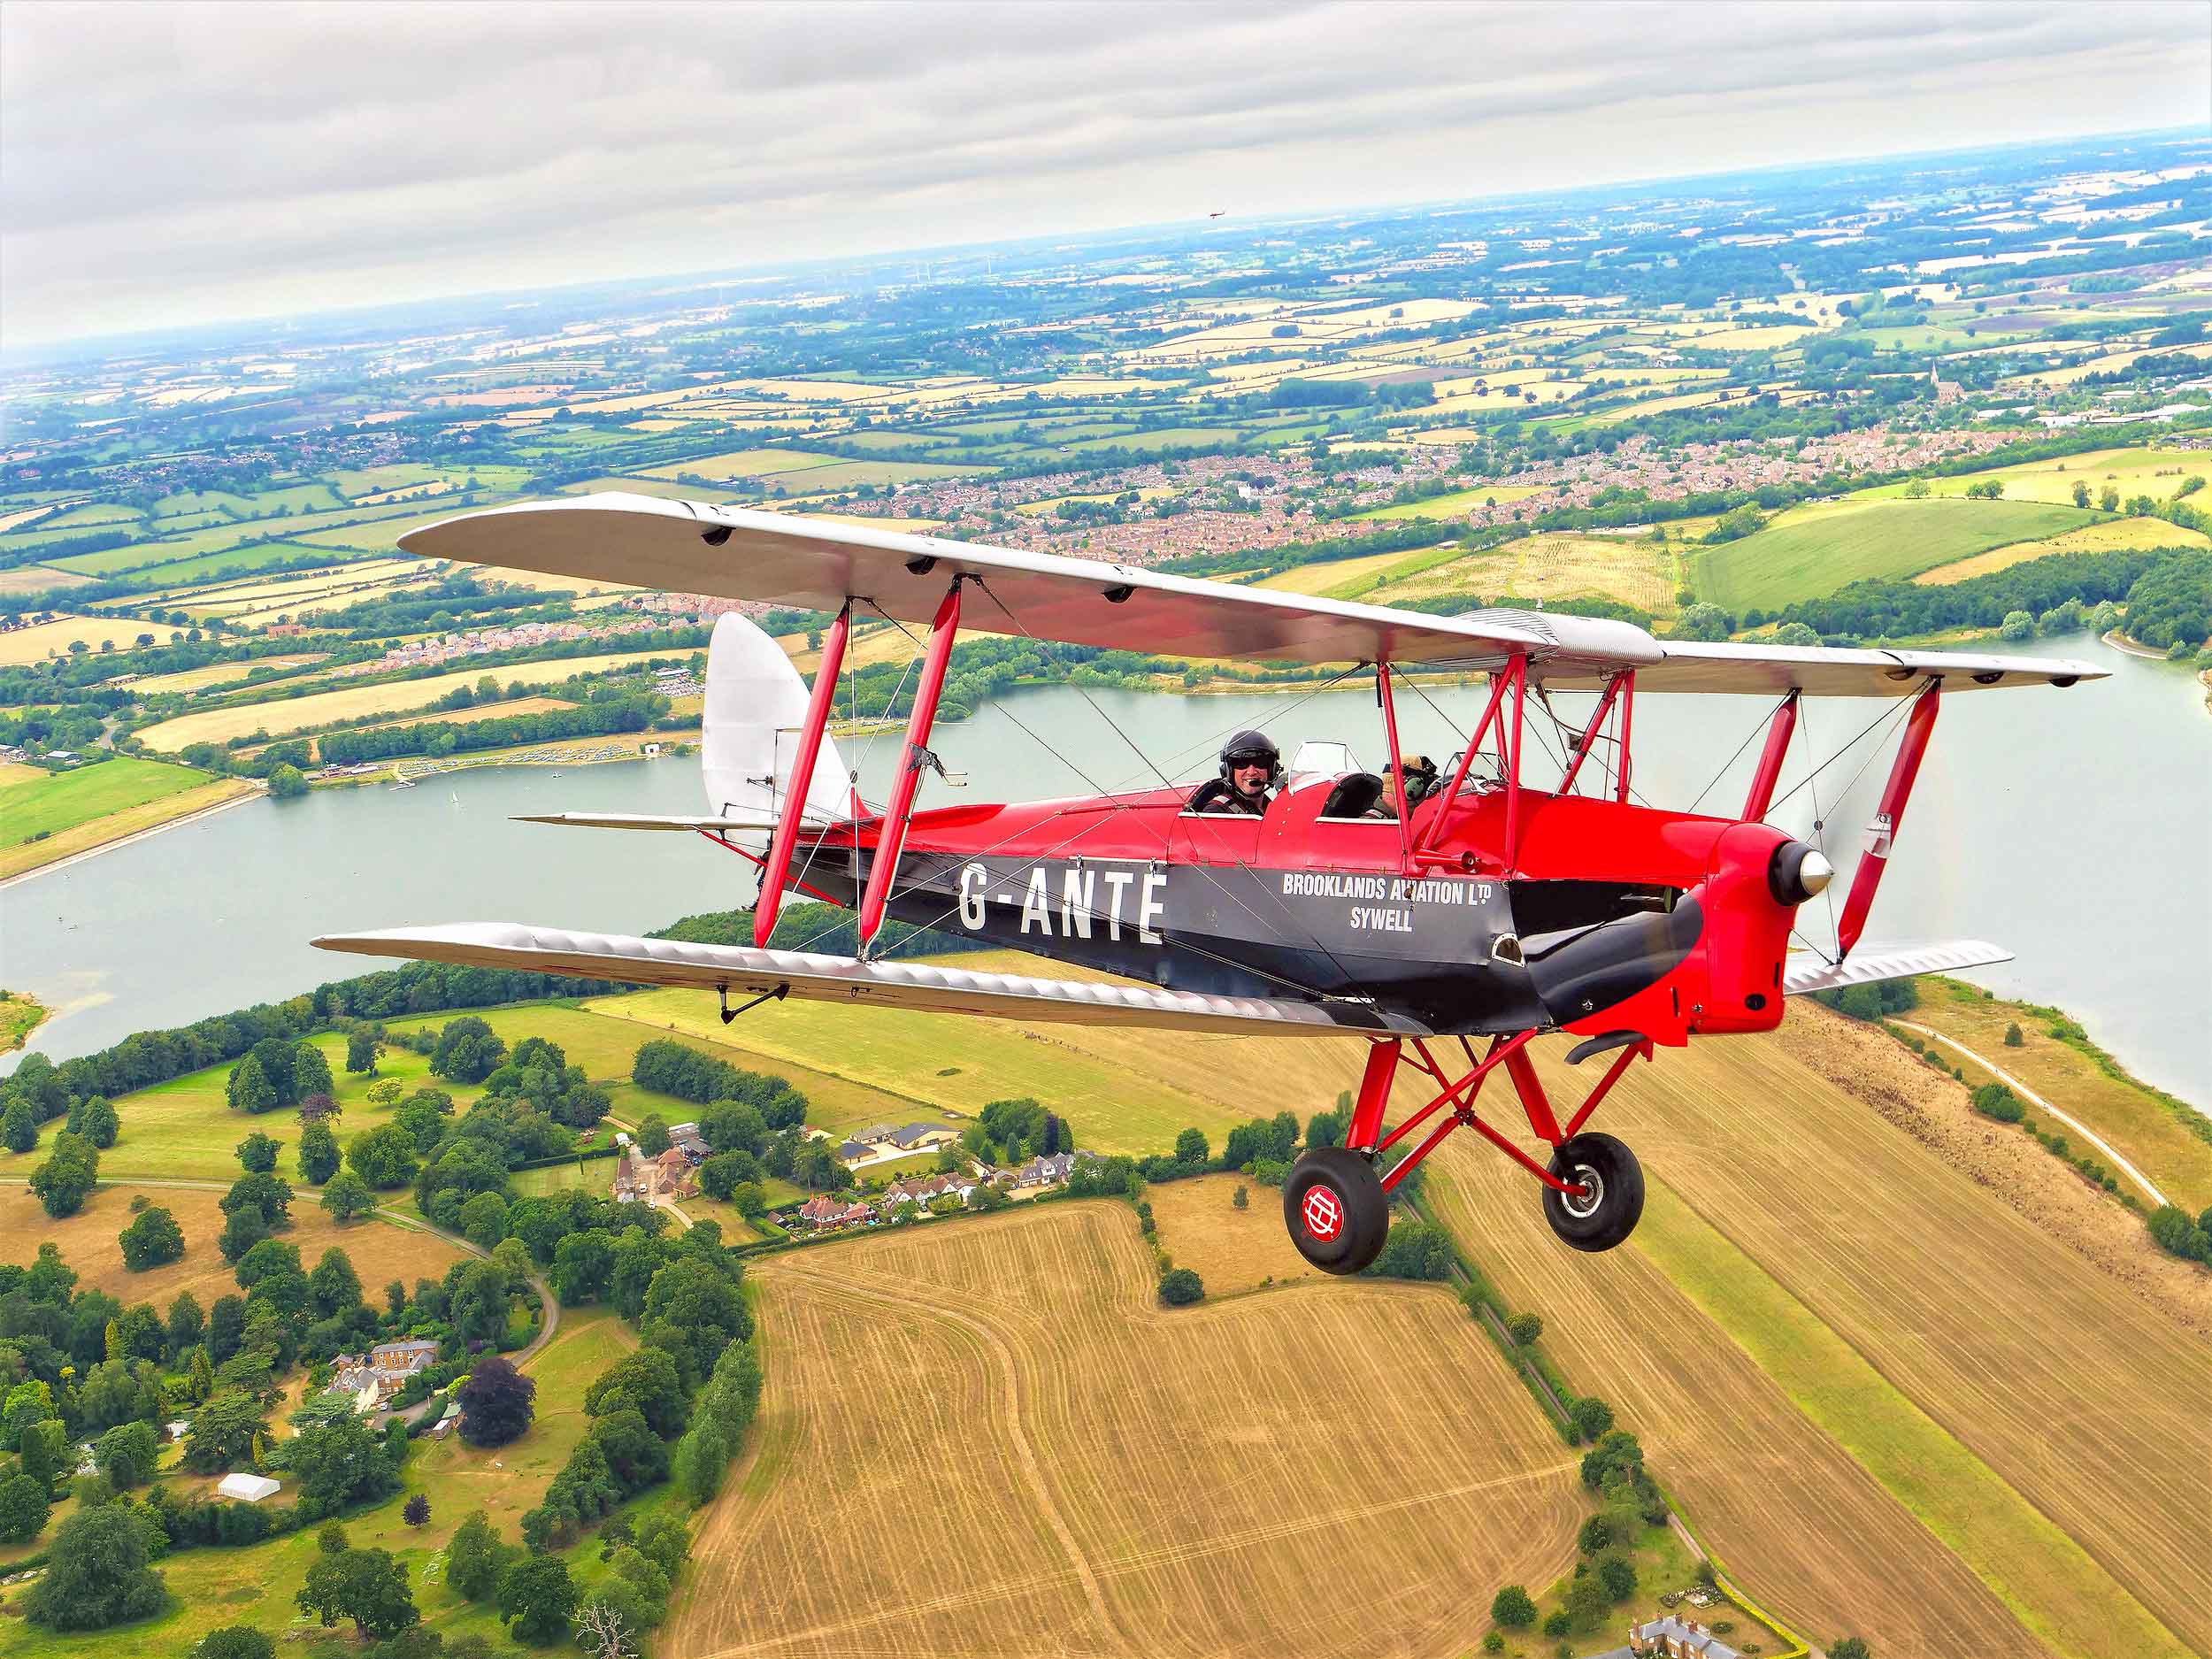 Thomas Castle Aviation Heritage Scholarship de Havilland DH.82a Tiger Moth II G-ANTE over Pitsford Water near Sywell with Richard Grace